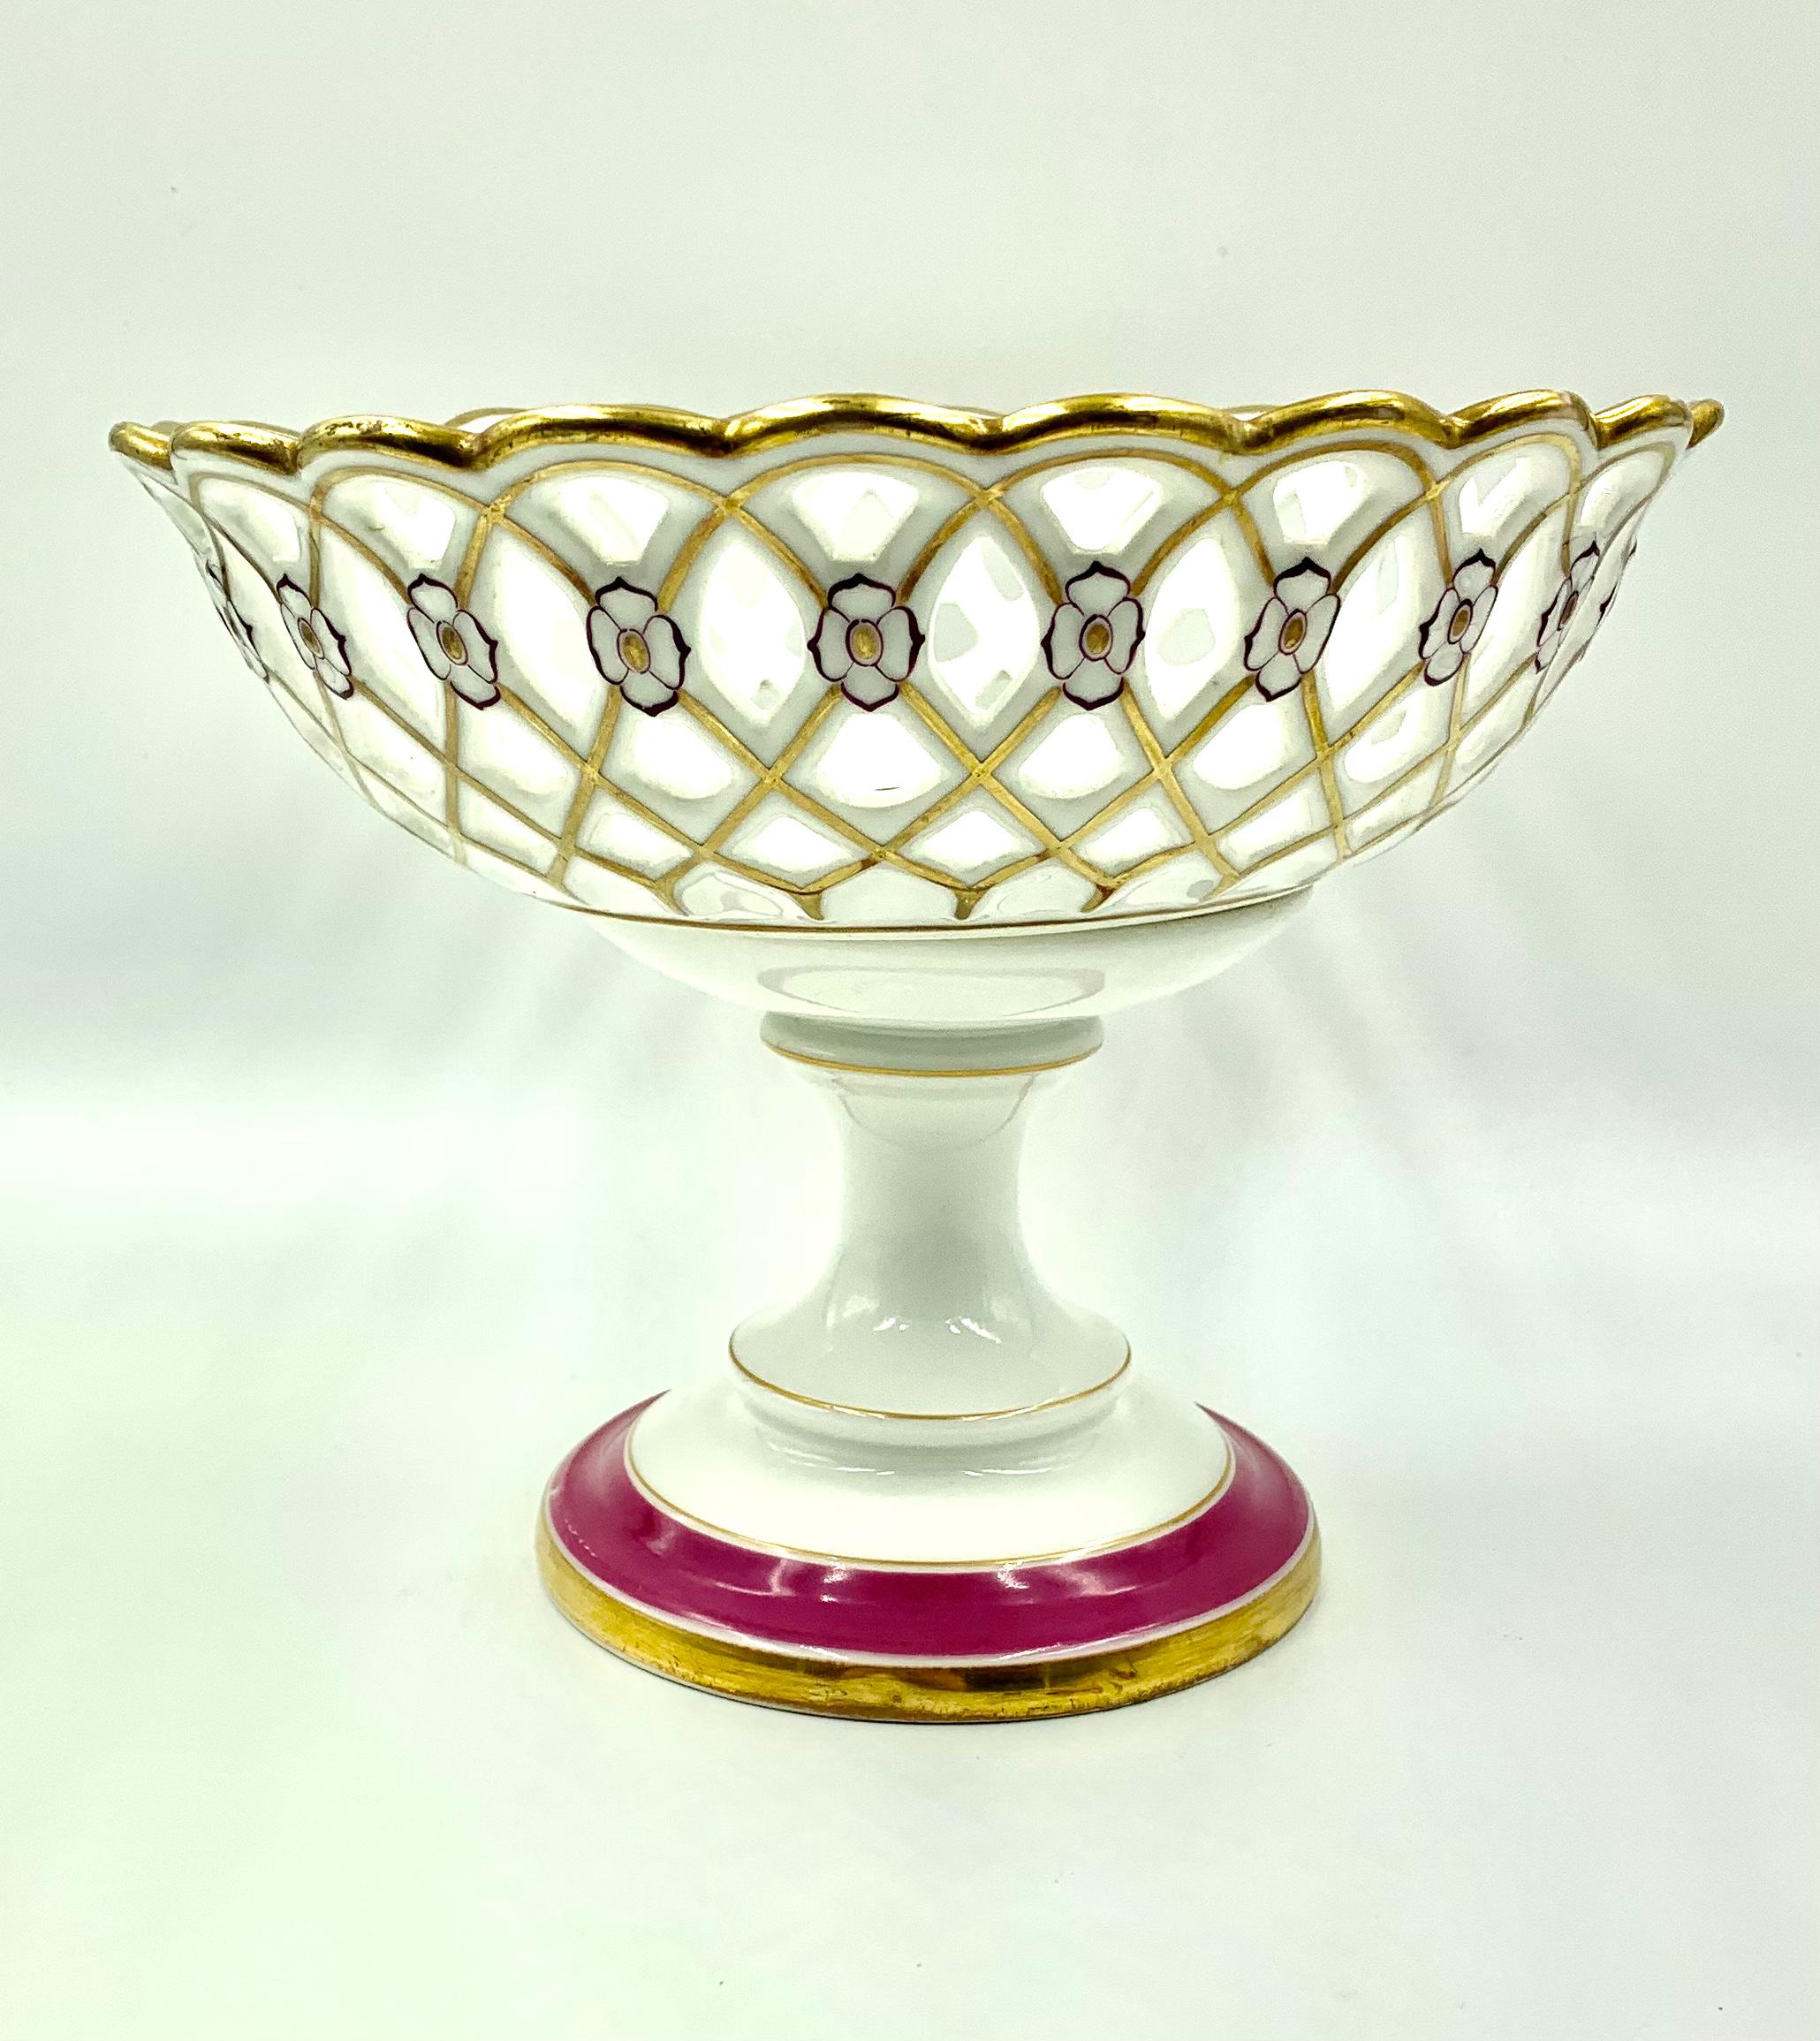 19th Century Paris Porcelain Reticulated Gold, Pink Neoclassical Centerpiece For Sale 3